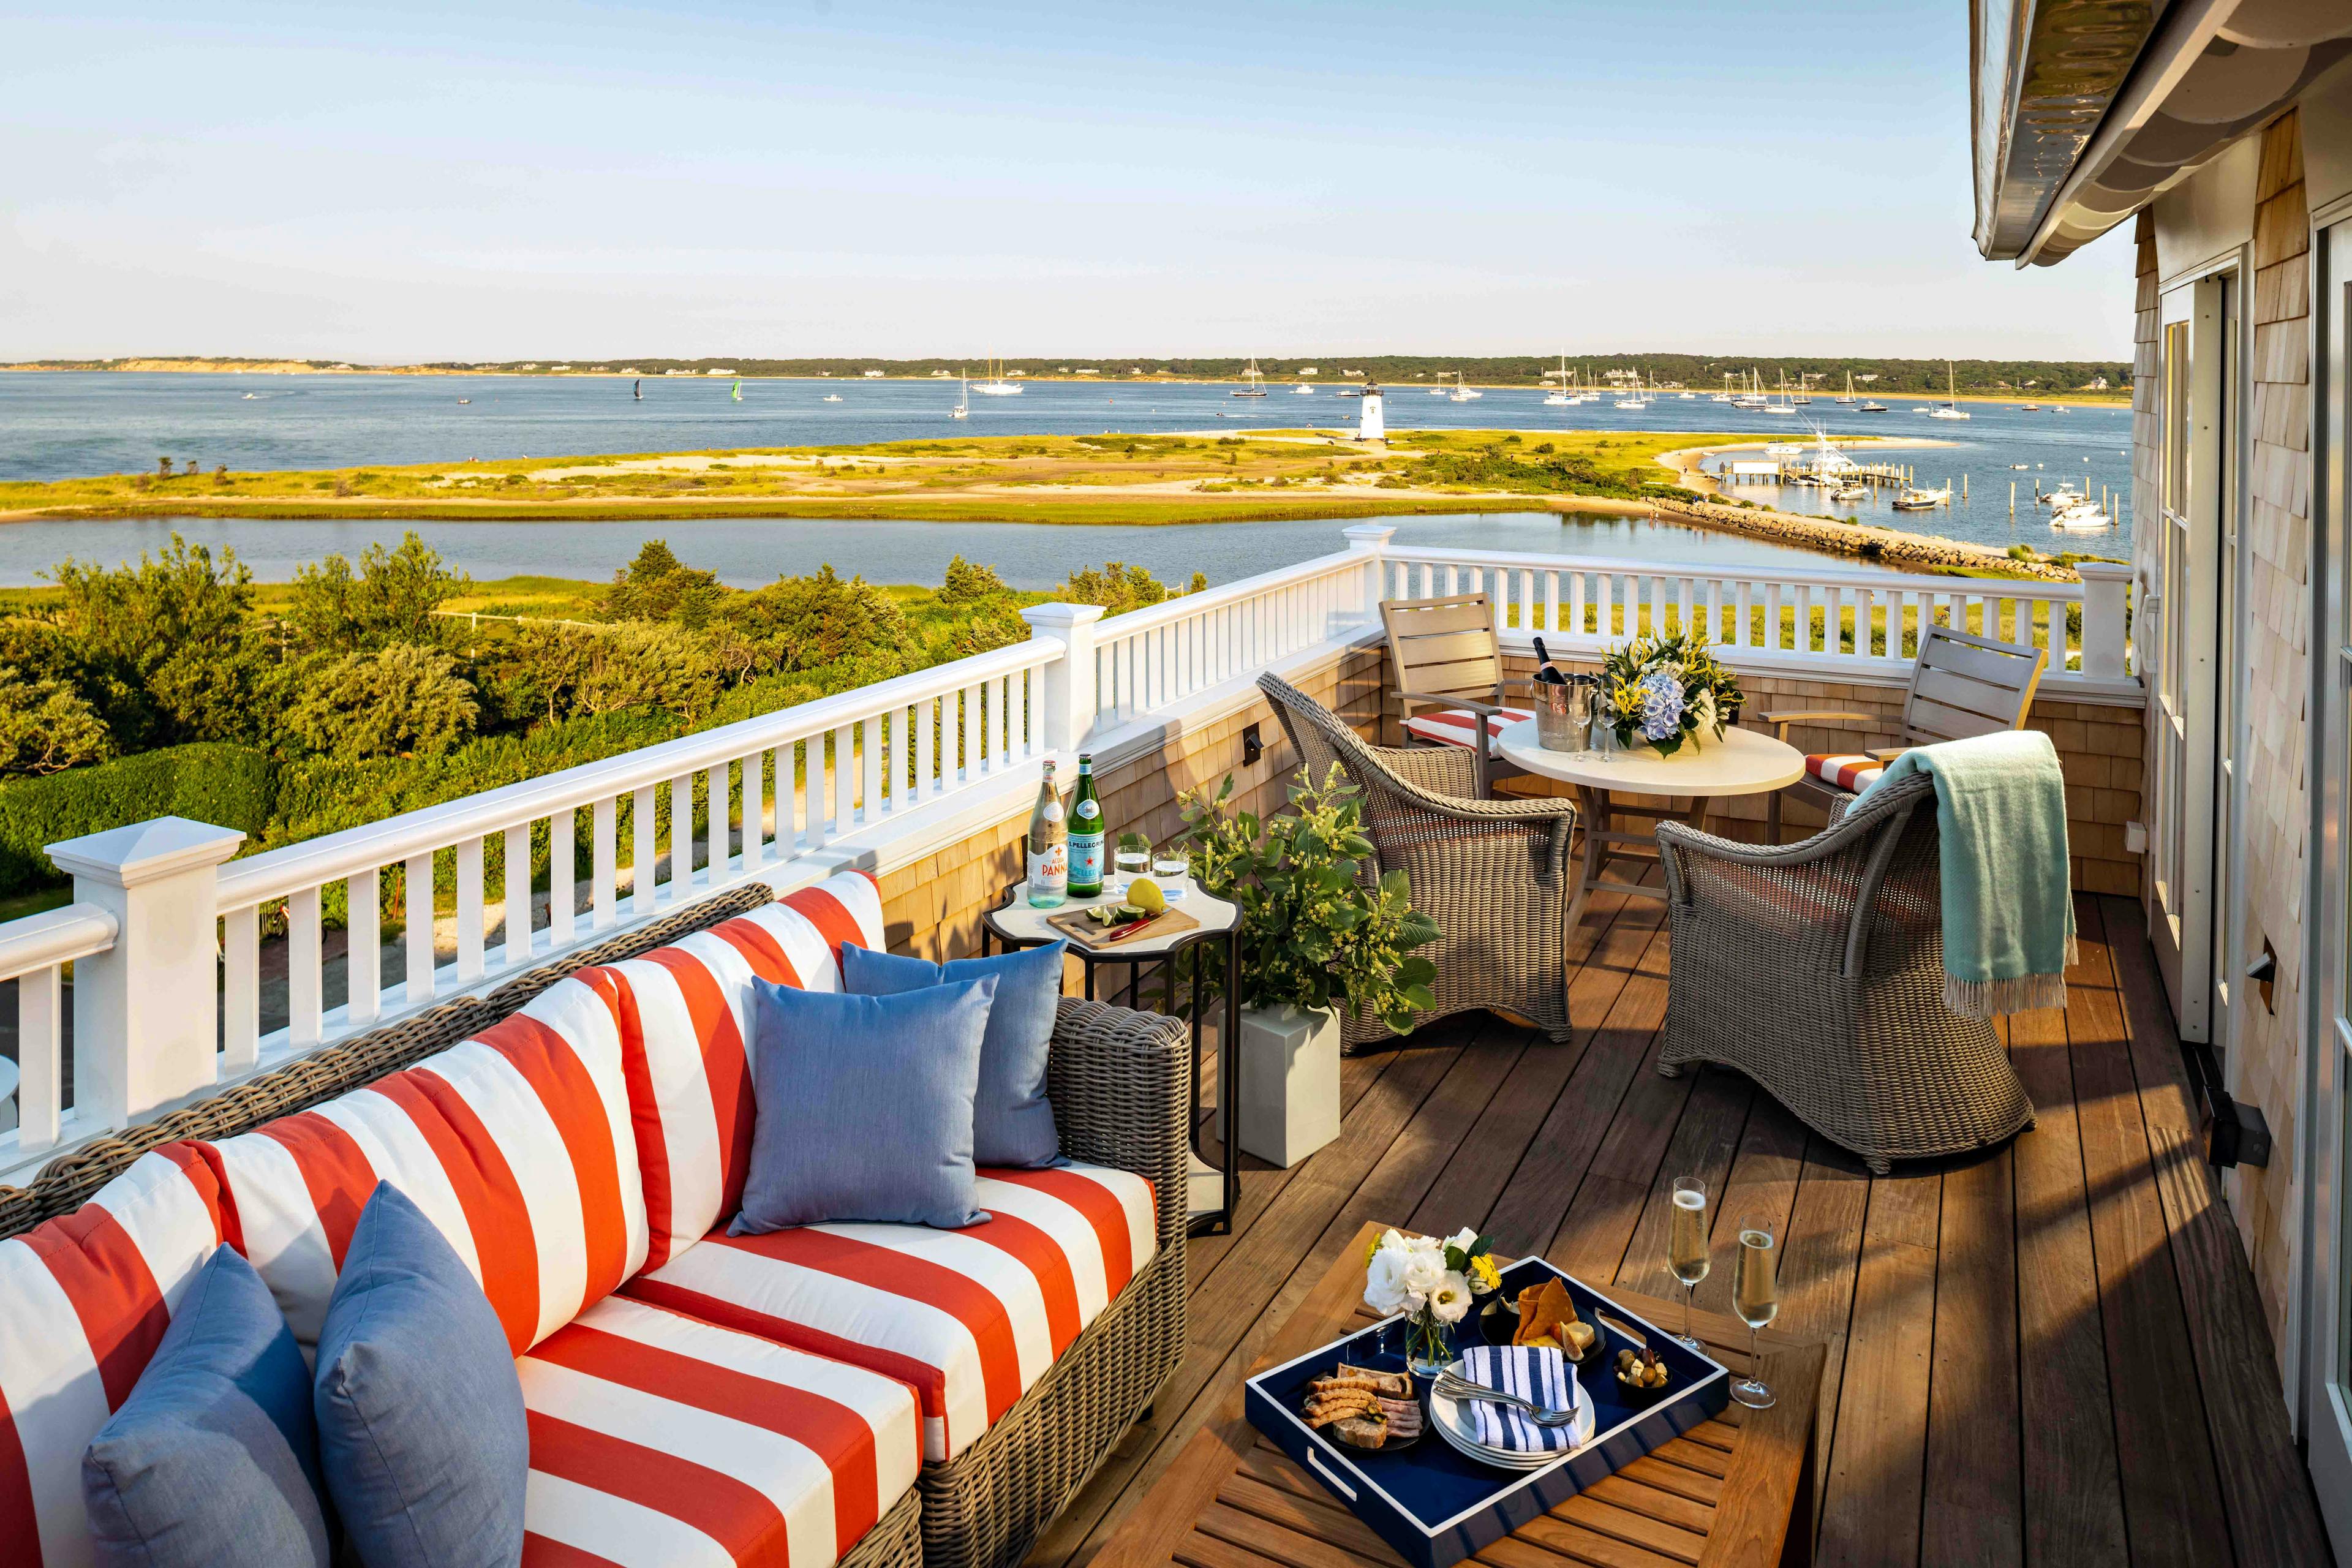 Start Planning for Summer with the Harbor View Hotel